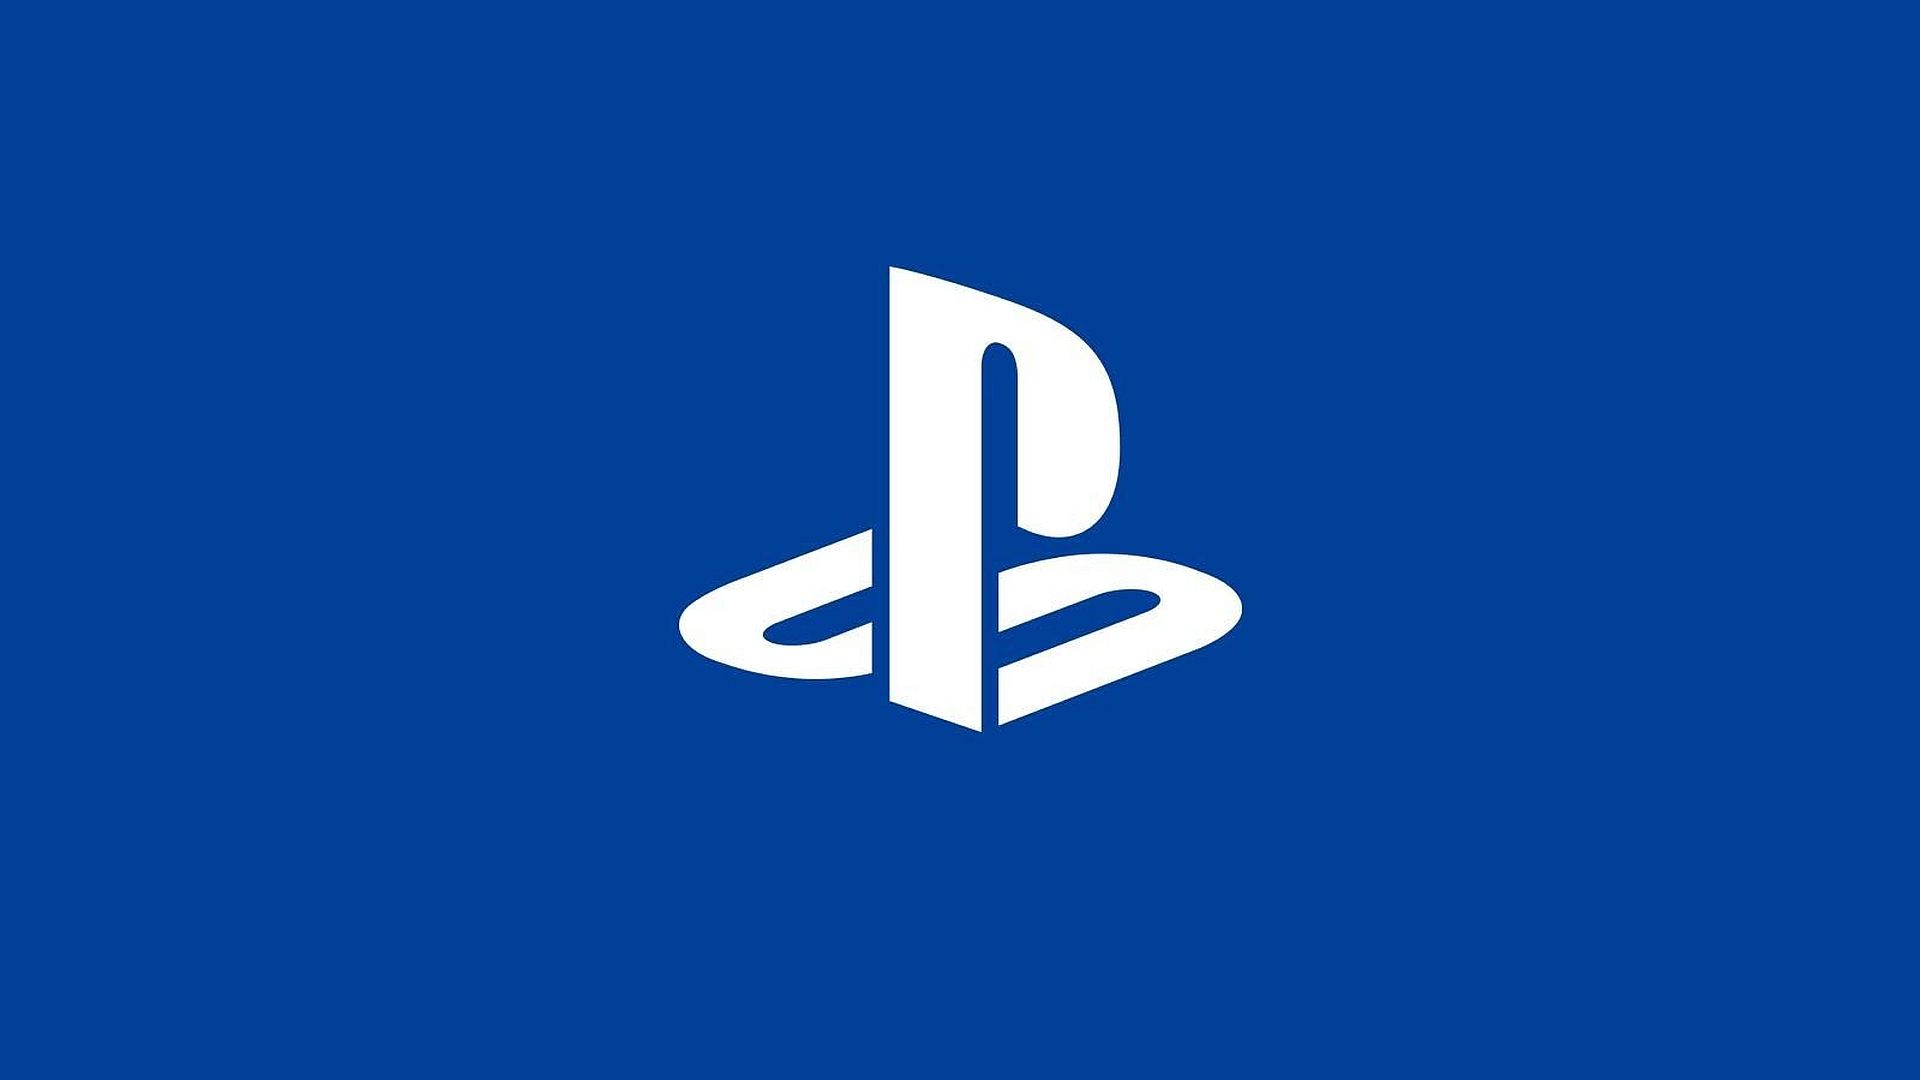 18 Playstation HD Wallpapers | Backgrounds - Wallpaper Abyss